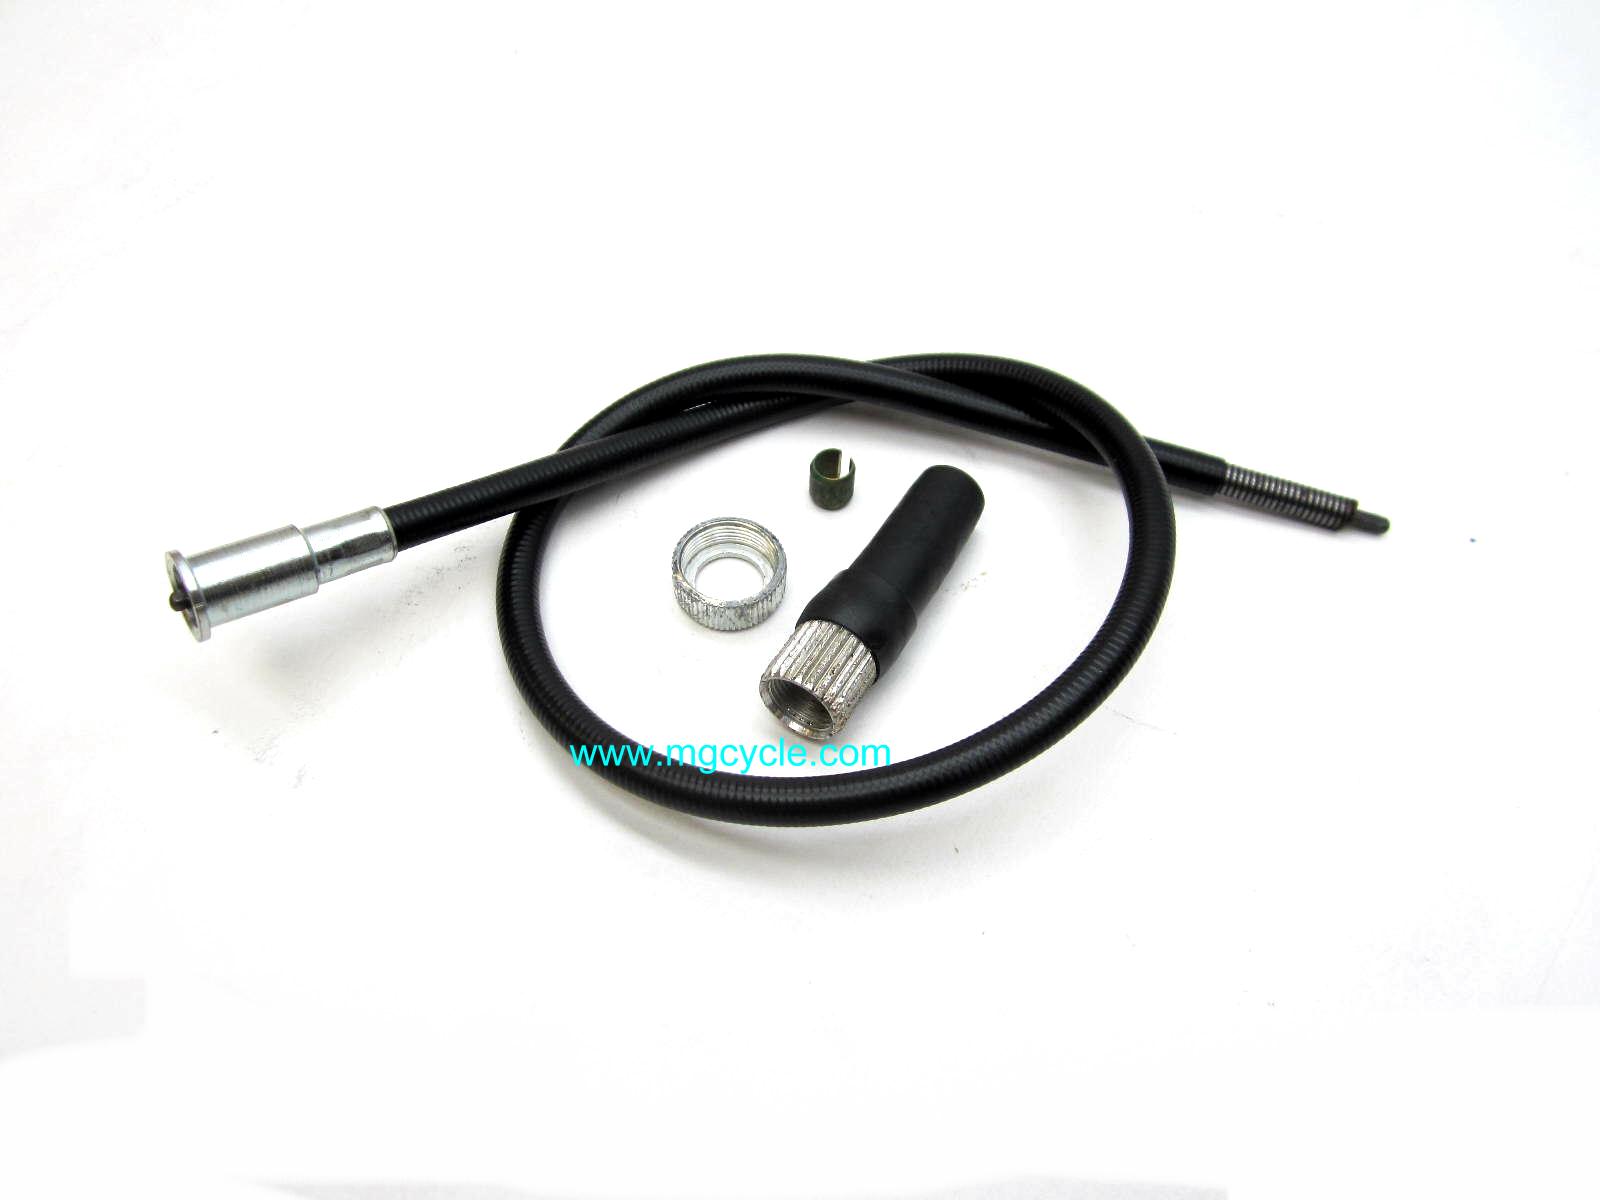 Tachometer cable, V50 Monza, T5